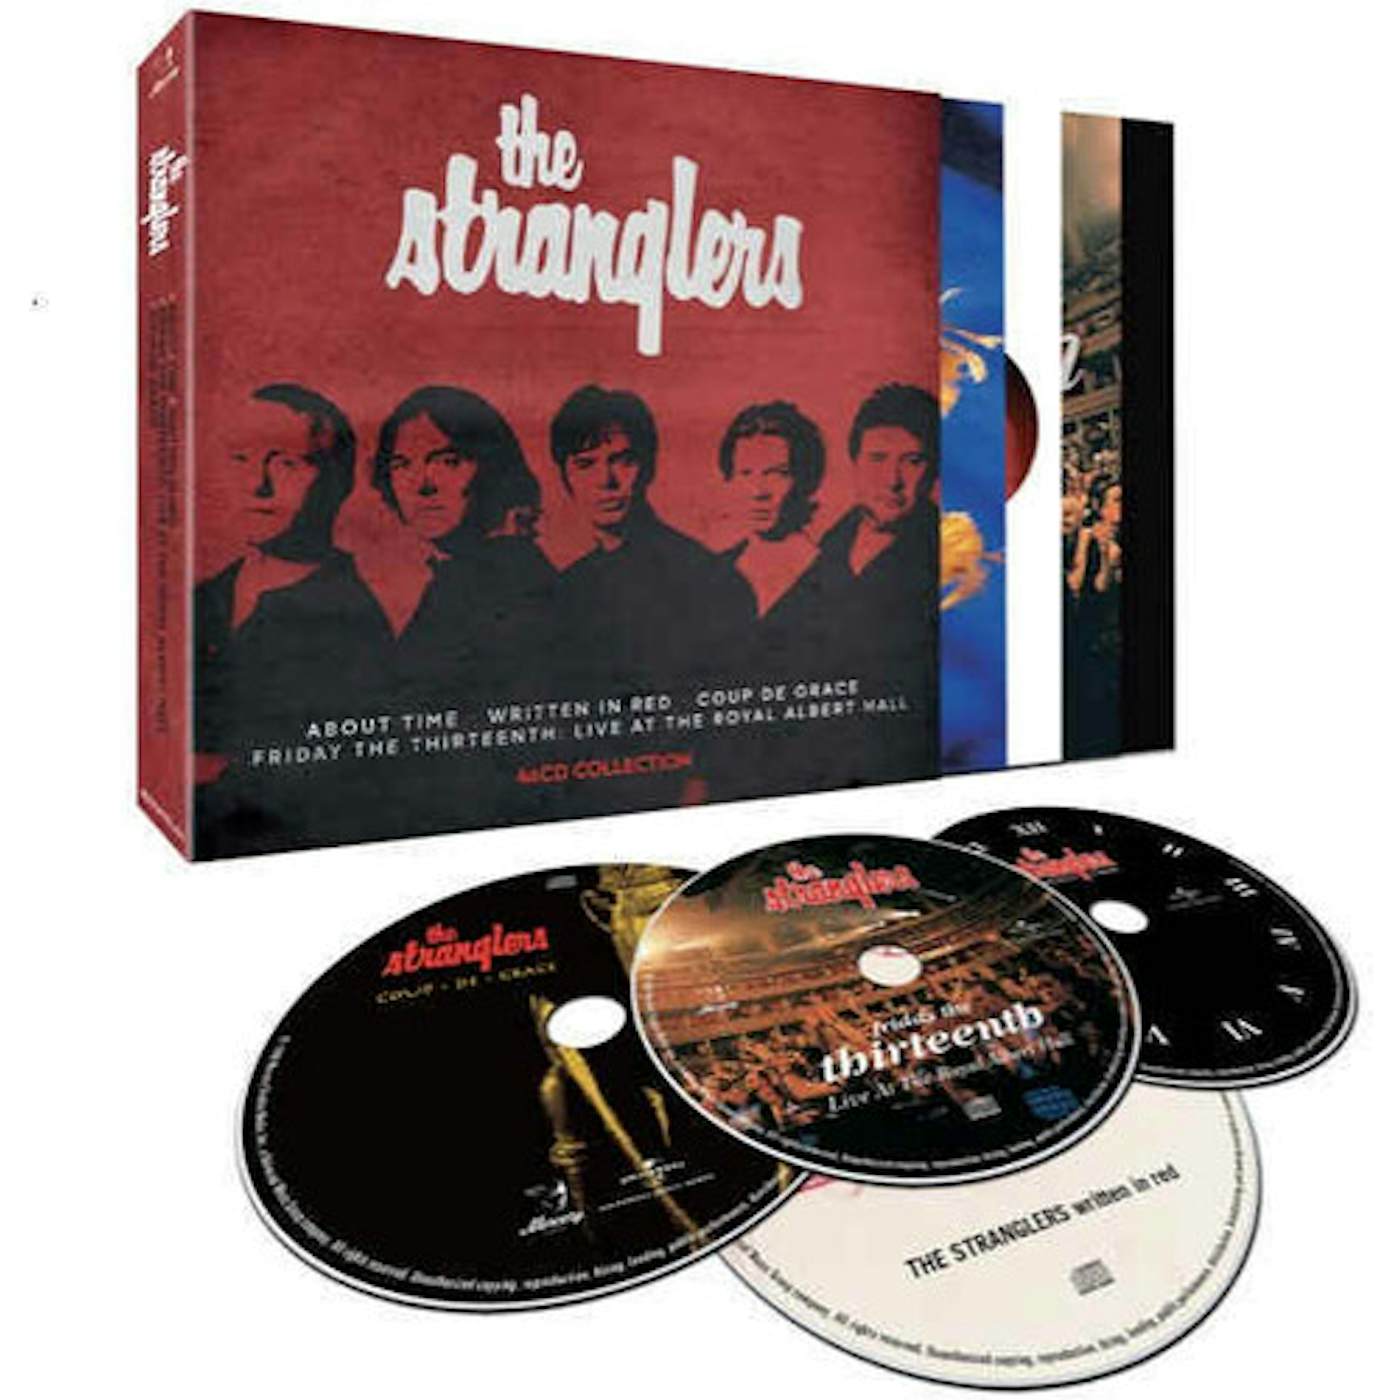 The Stranglers 4 CD COLLECTION CD